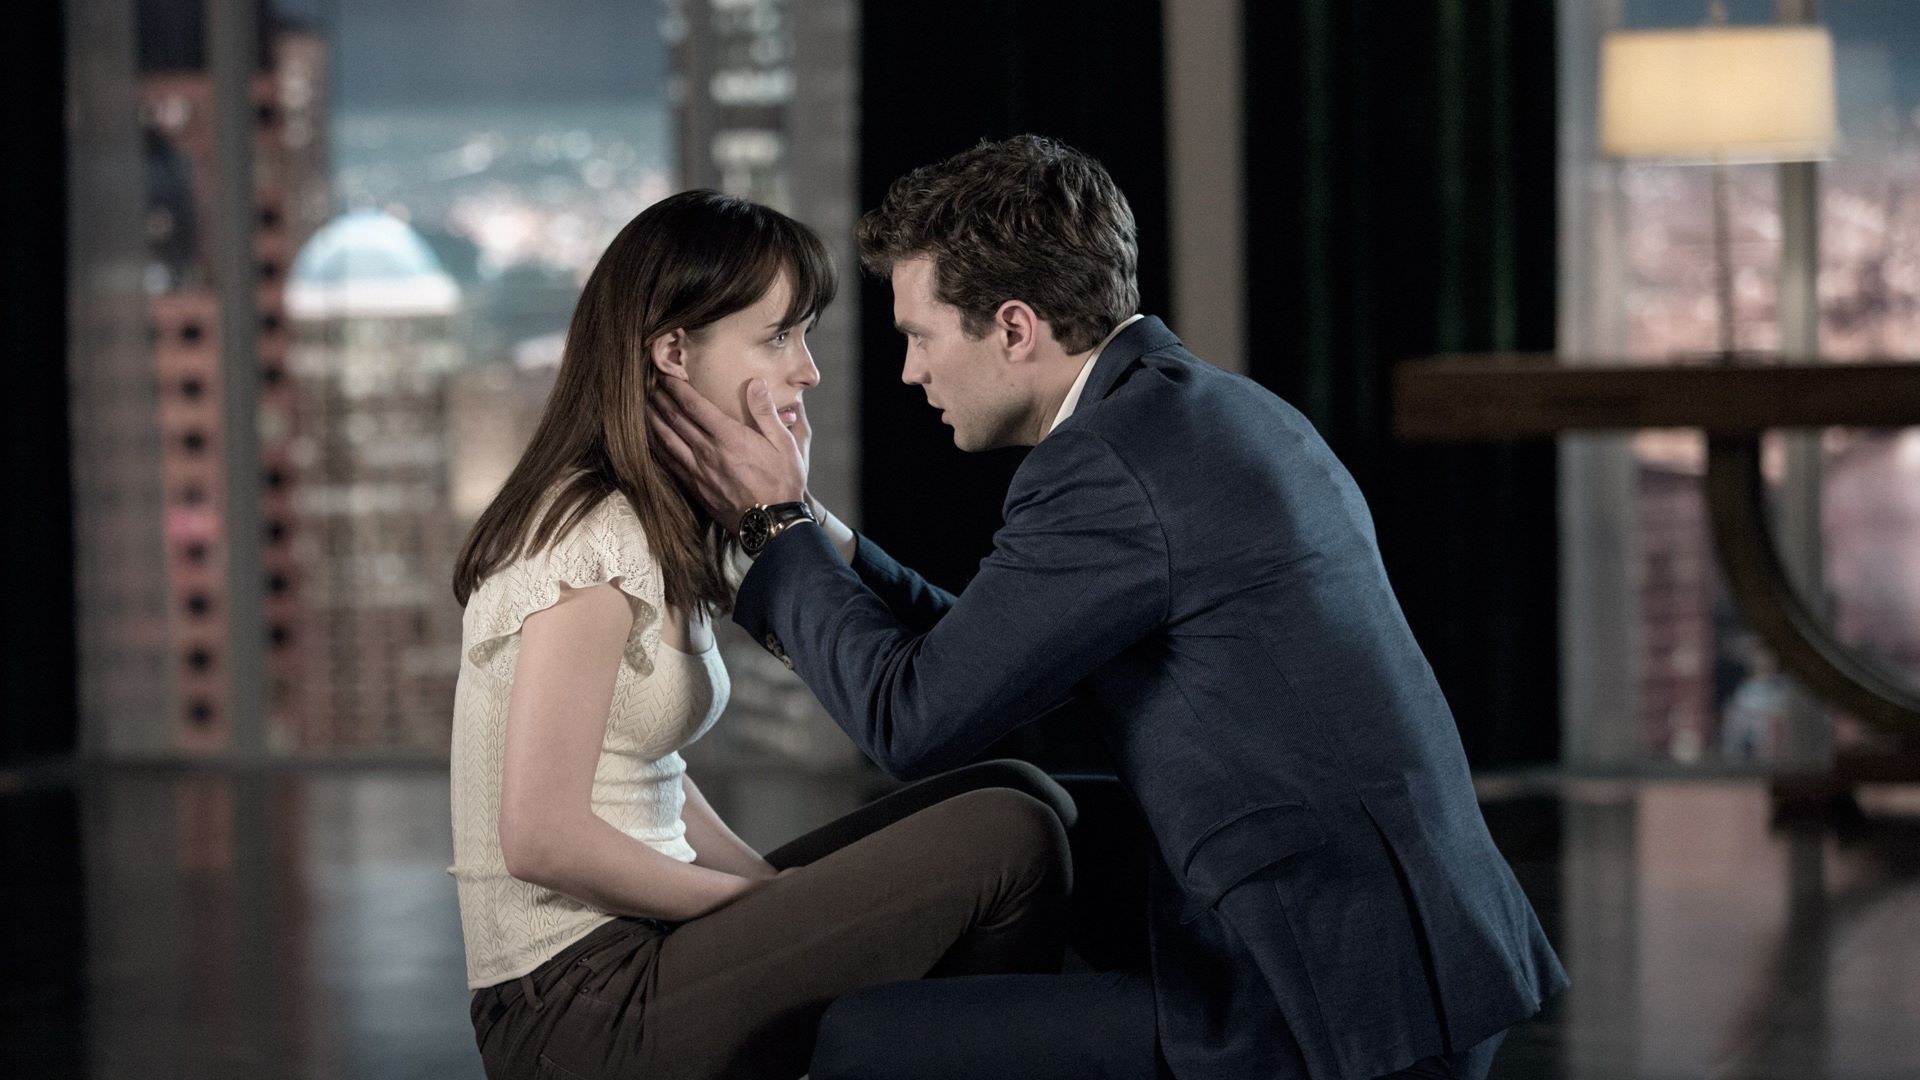 Fifty Shades Of Grey Now Available On Demand